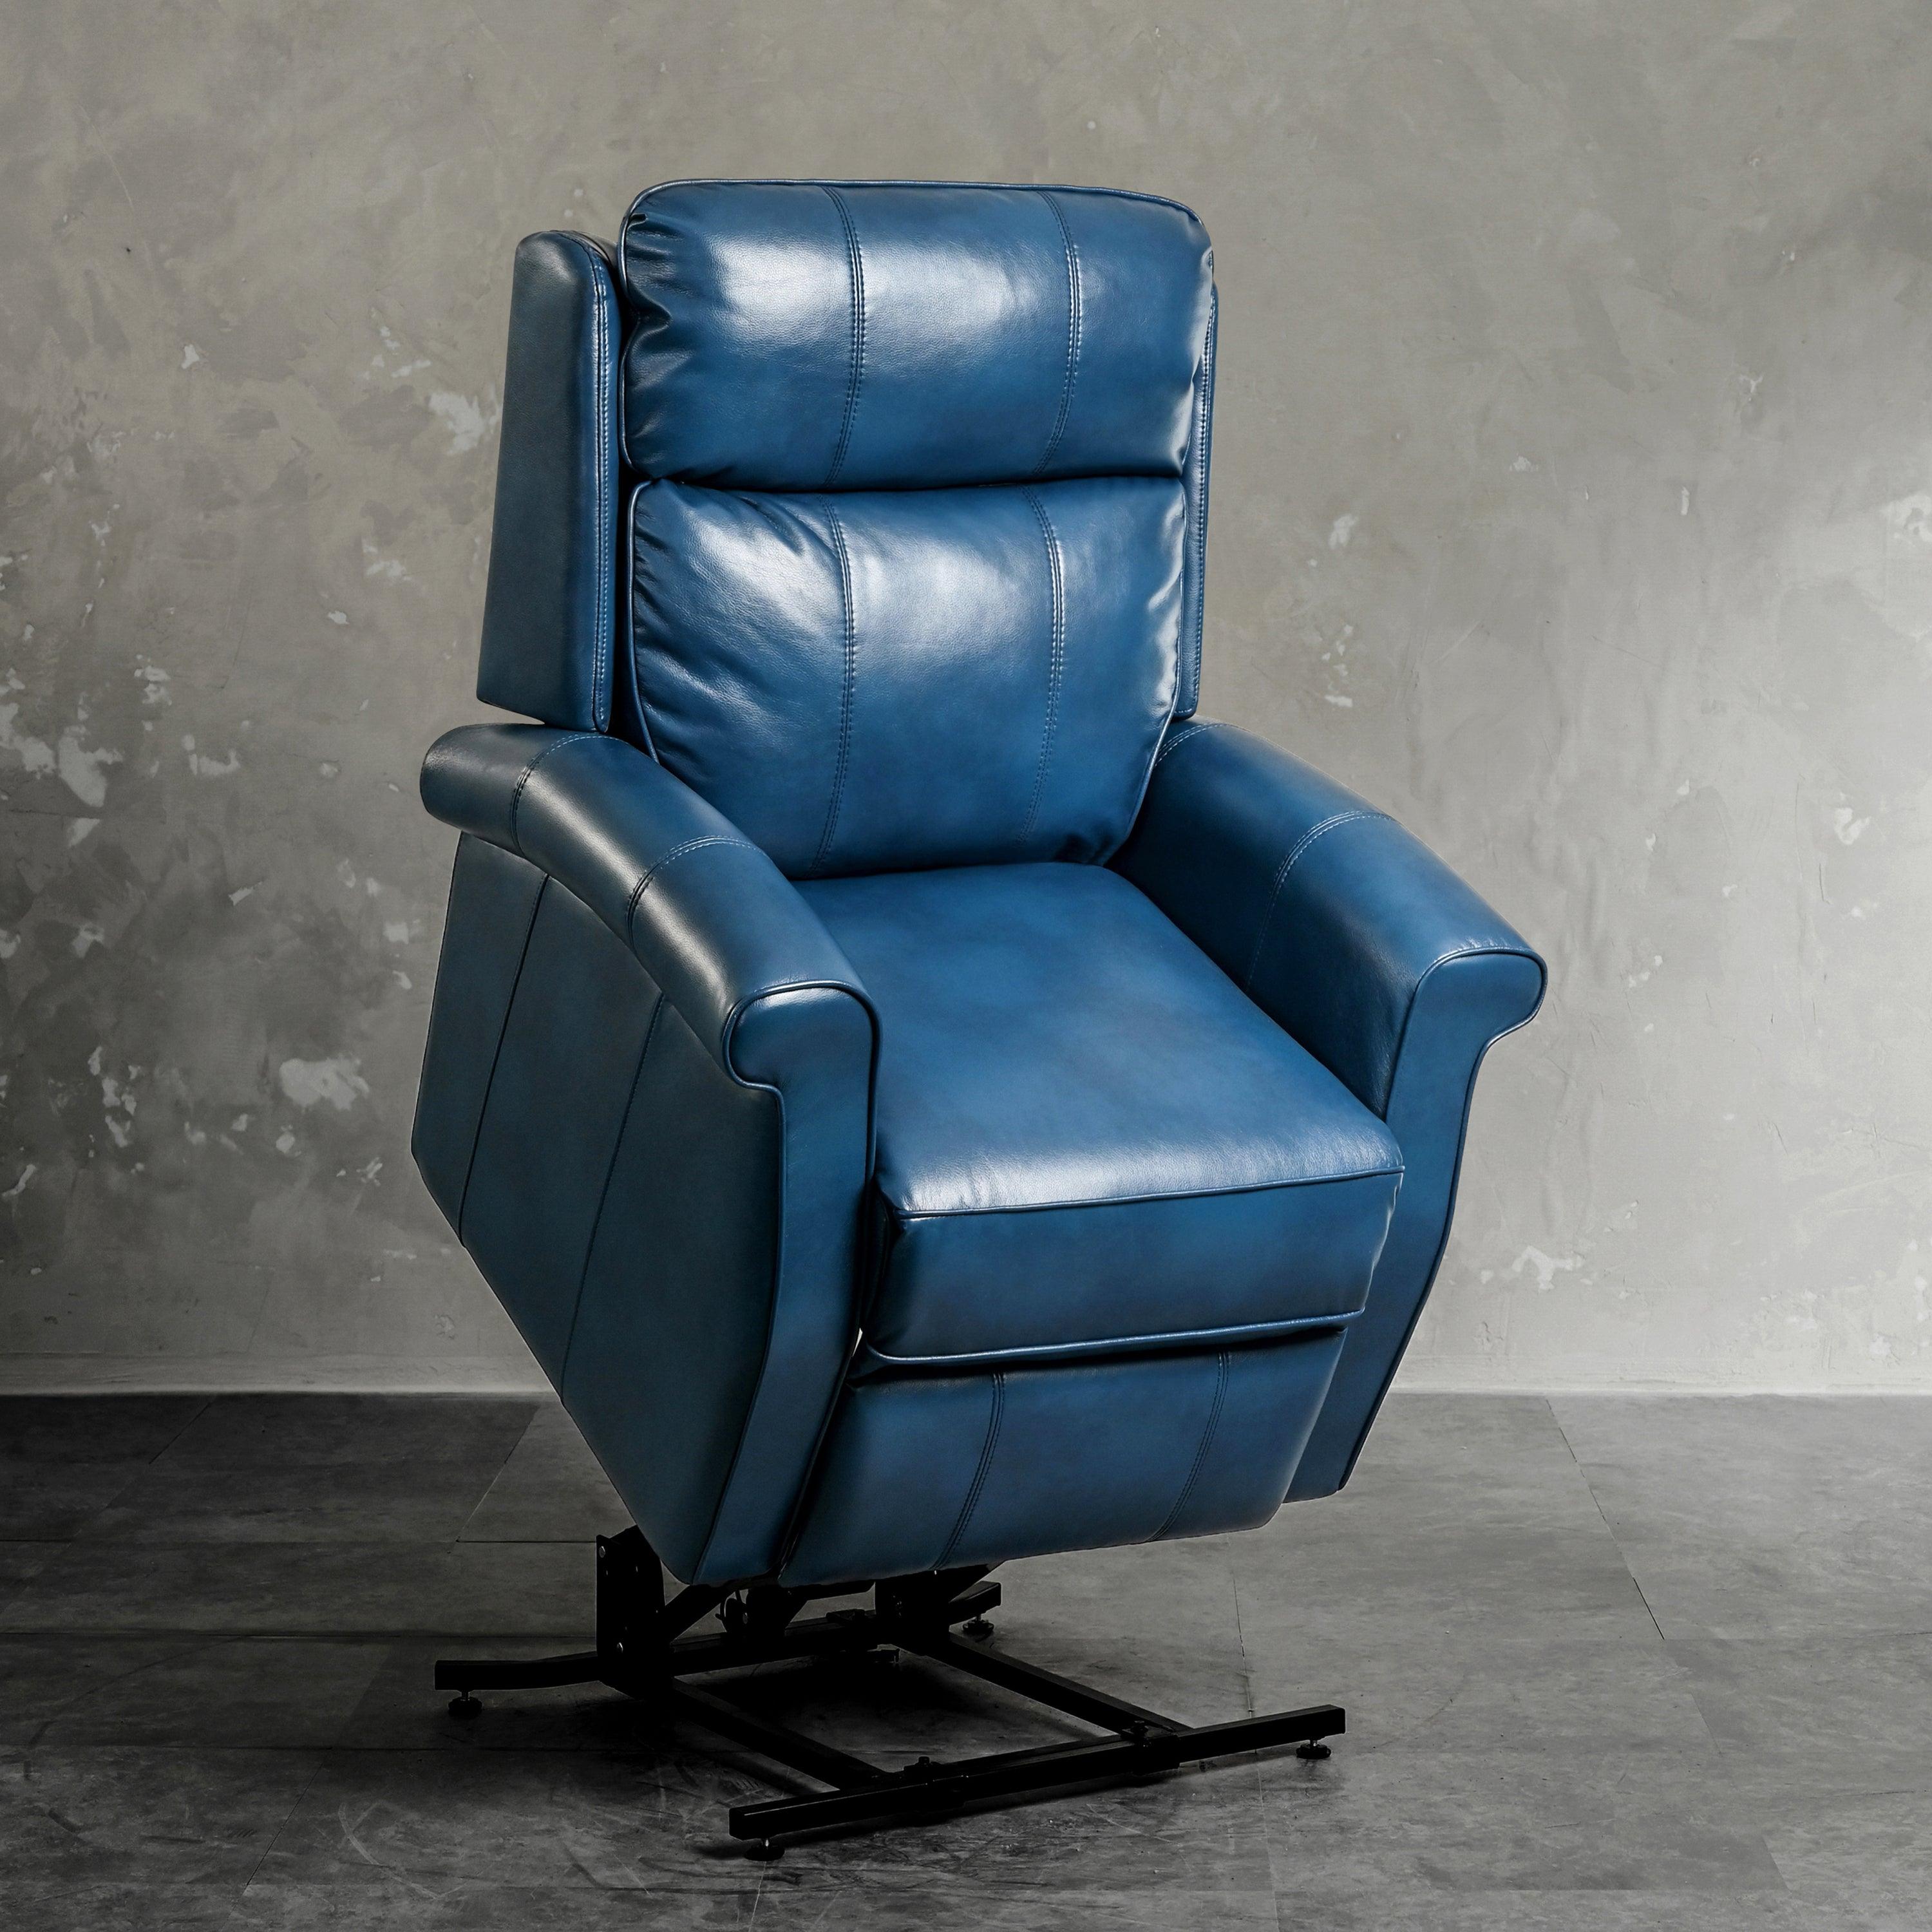 Lift Chair Recliner, Blue with Stitching, liftec